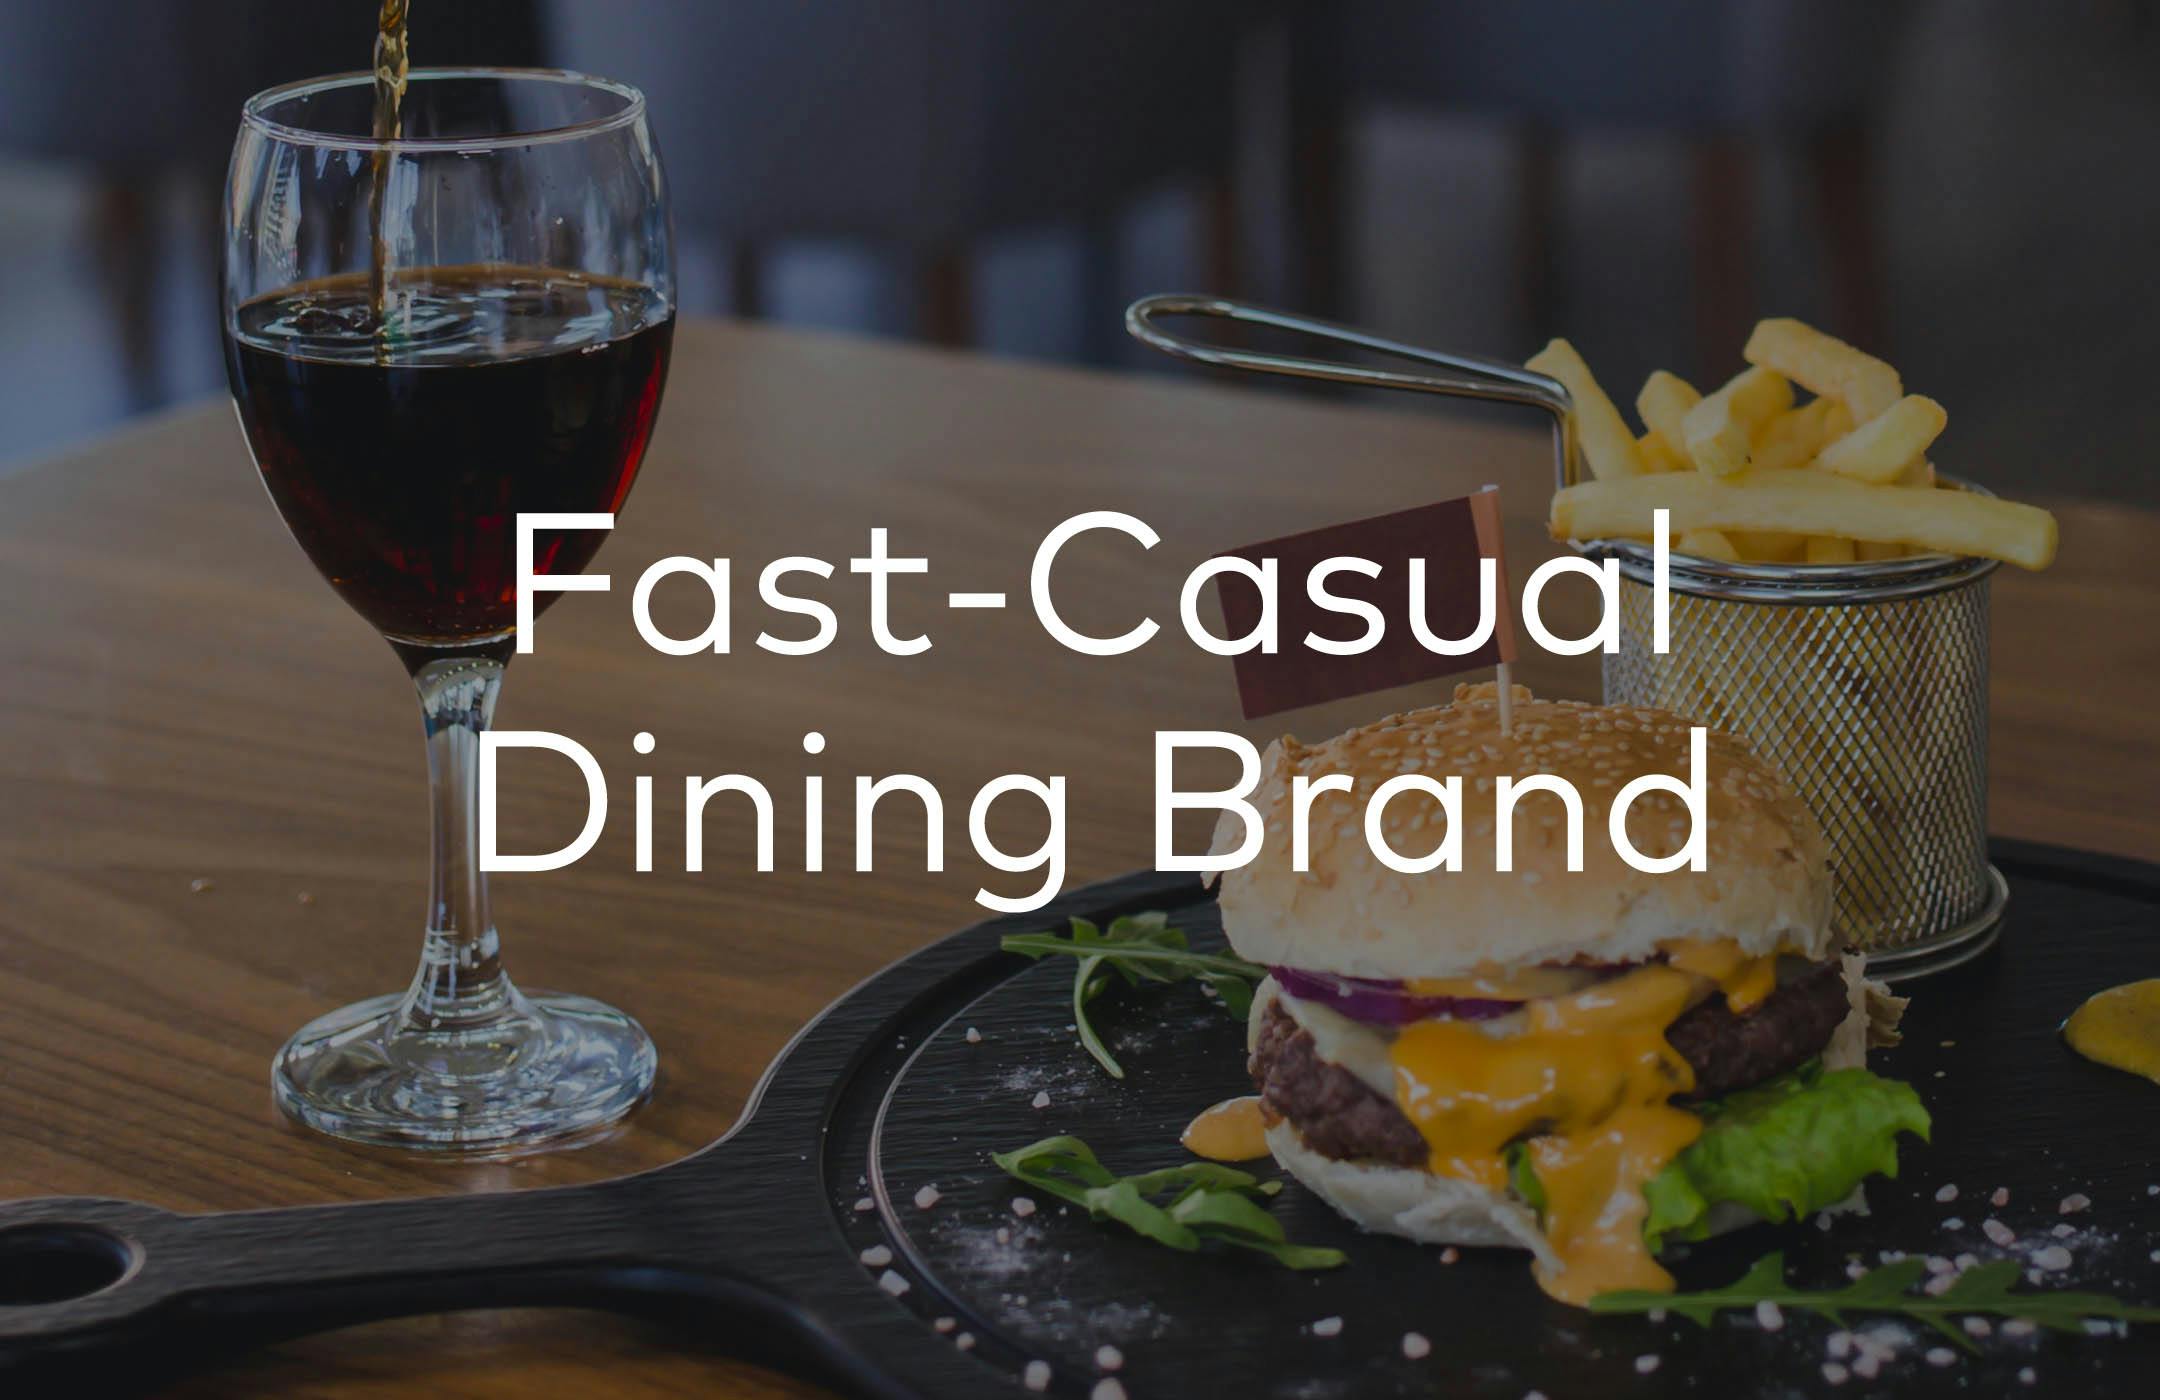 Image of burger, fries, and glass of wine with words: Fast-Casual Dining Brand. 